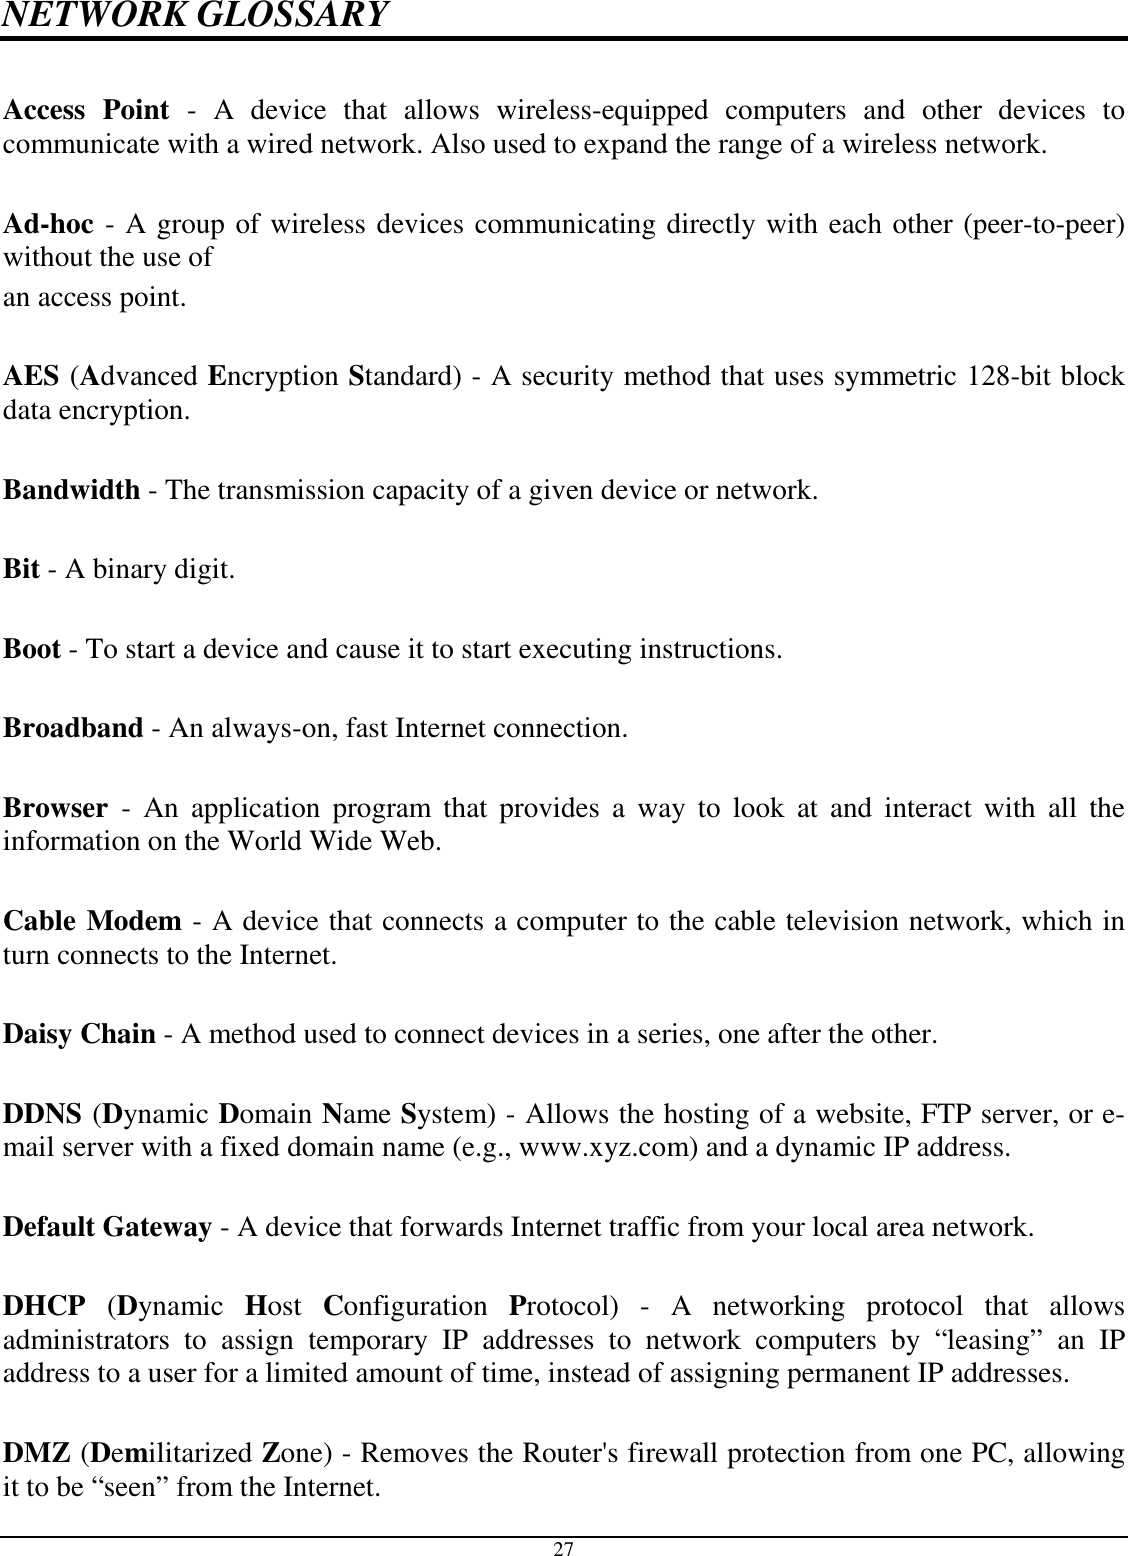  27 NETWORK GLOSSARY  Access  Point  -  A  device  that  allows  wireless-equipped  computers  and  other  devices  to communicate with a wired network. Also used to expand the range of a wireless network.  Ad-hoc - A group of wireless devices communicating directly with each other (peer-to-peer) without the use of an access point.  AES (Advanced Encryption Standard) - A security method that uses symmetric 128-bit block data encryption.  Bandwidth - The transmission capacity of a given device or network.  Bit - A binary digit.  Boot - To start a device and cause it to start executing instructions.  Broadband - An always-on, fast Internet connection.  Browser  -  An  application  program  that  provides  a  way  to  look  at  and  interact with  all  the information on the World Wide Web.  Cable Modem - A device that connects a computer to the cable television network, which in turn connects to the Internet.  Daisy Chain - A method used to connect devices in a series, one after the other.  DDNS (Dynamic Domain Name System) - Allows the hosting of a website, FTP server, or e-mail server with a fixed domain name (e.g., www.xyz.com) and a dynamic IP address.  Default Gateway - A device that forwards Internet traffic from your local area network.  DHCP  (Dynamic  Host  Configuration  Protocol)  -  A  networking  protocol  that  allows administrators  to  assign  temporary  IP  addresses  to  network  computers  by  “leasing”  an  IP address to a user for a limited amount of time, instead of assigning permanent IP addresses.  DMZ (Demilitarized Zone) - Removes the Router&apos;s firewall protection from one PC, allowing it to be “seen” from the Internet. 